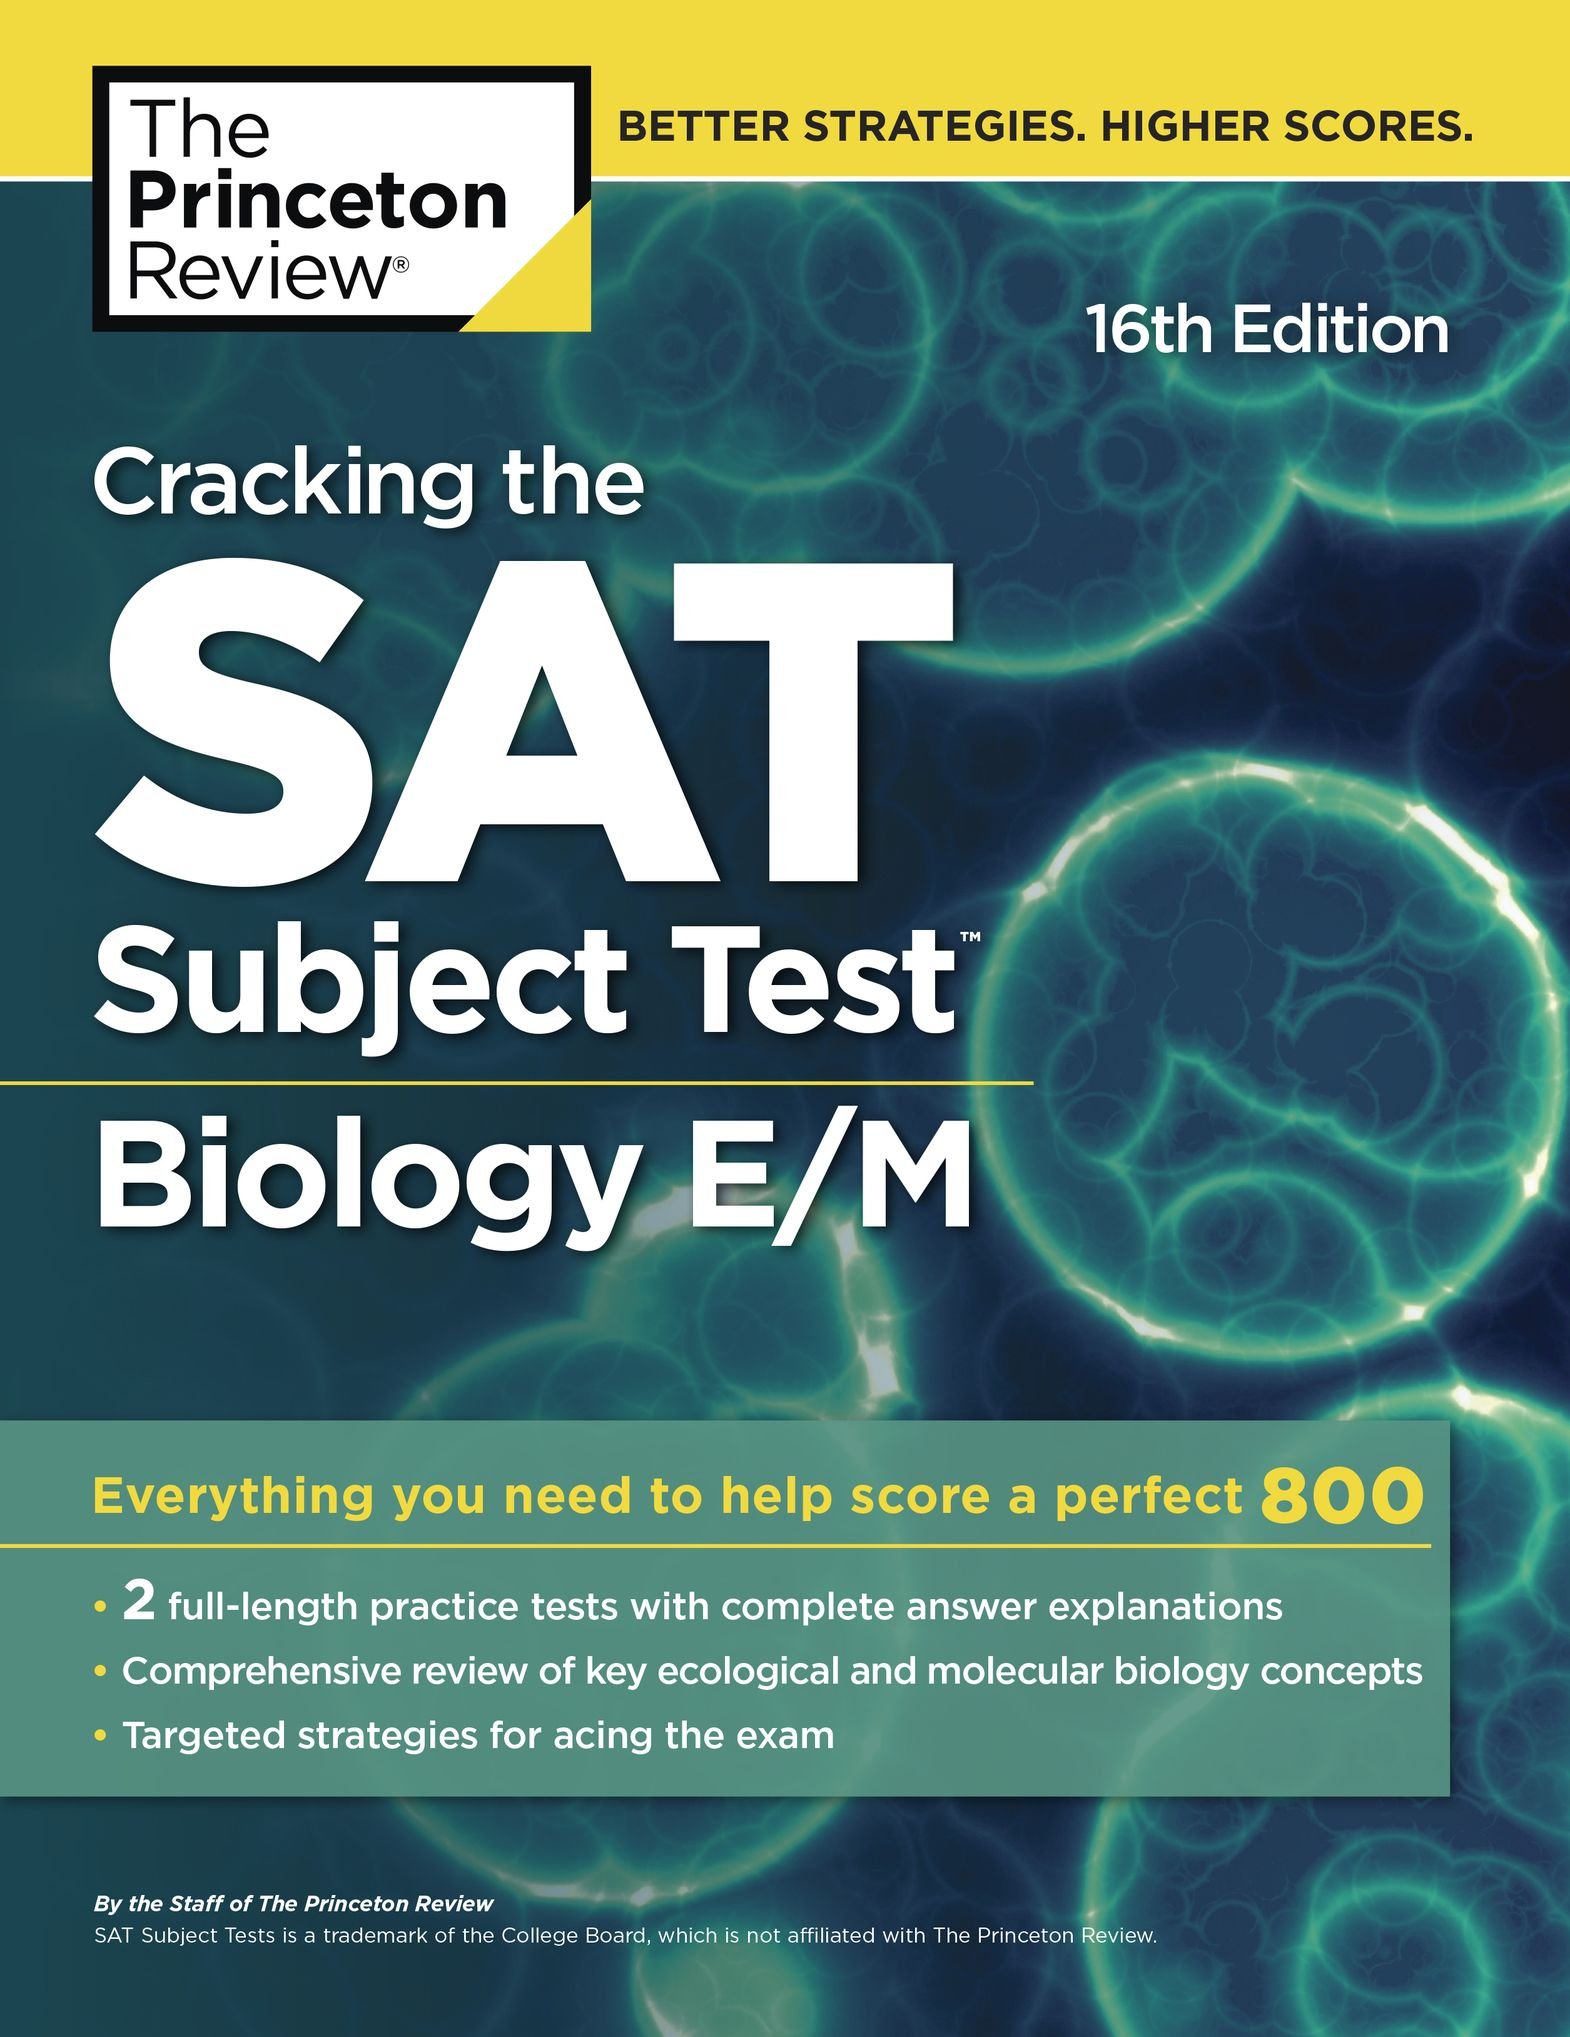 download-cracking-the-sat-subject-test-in-biology-e-m-everything-you-need-to-help-score-a